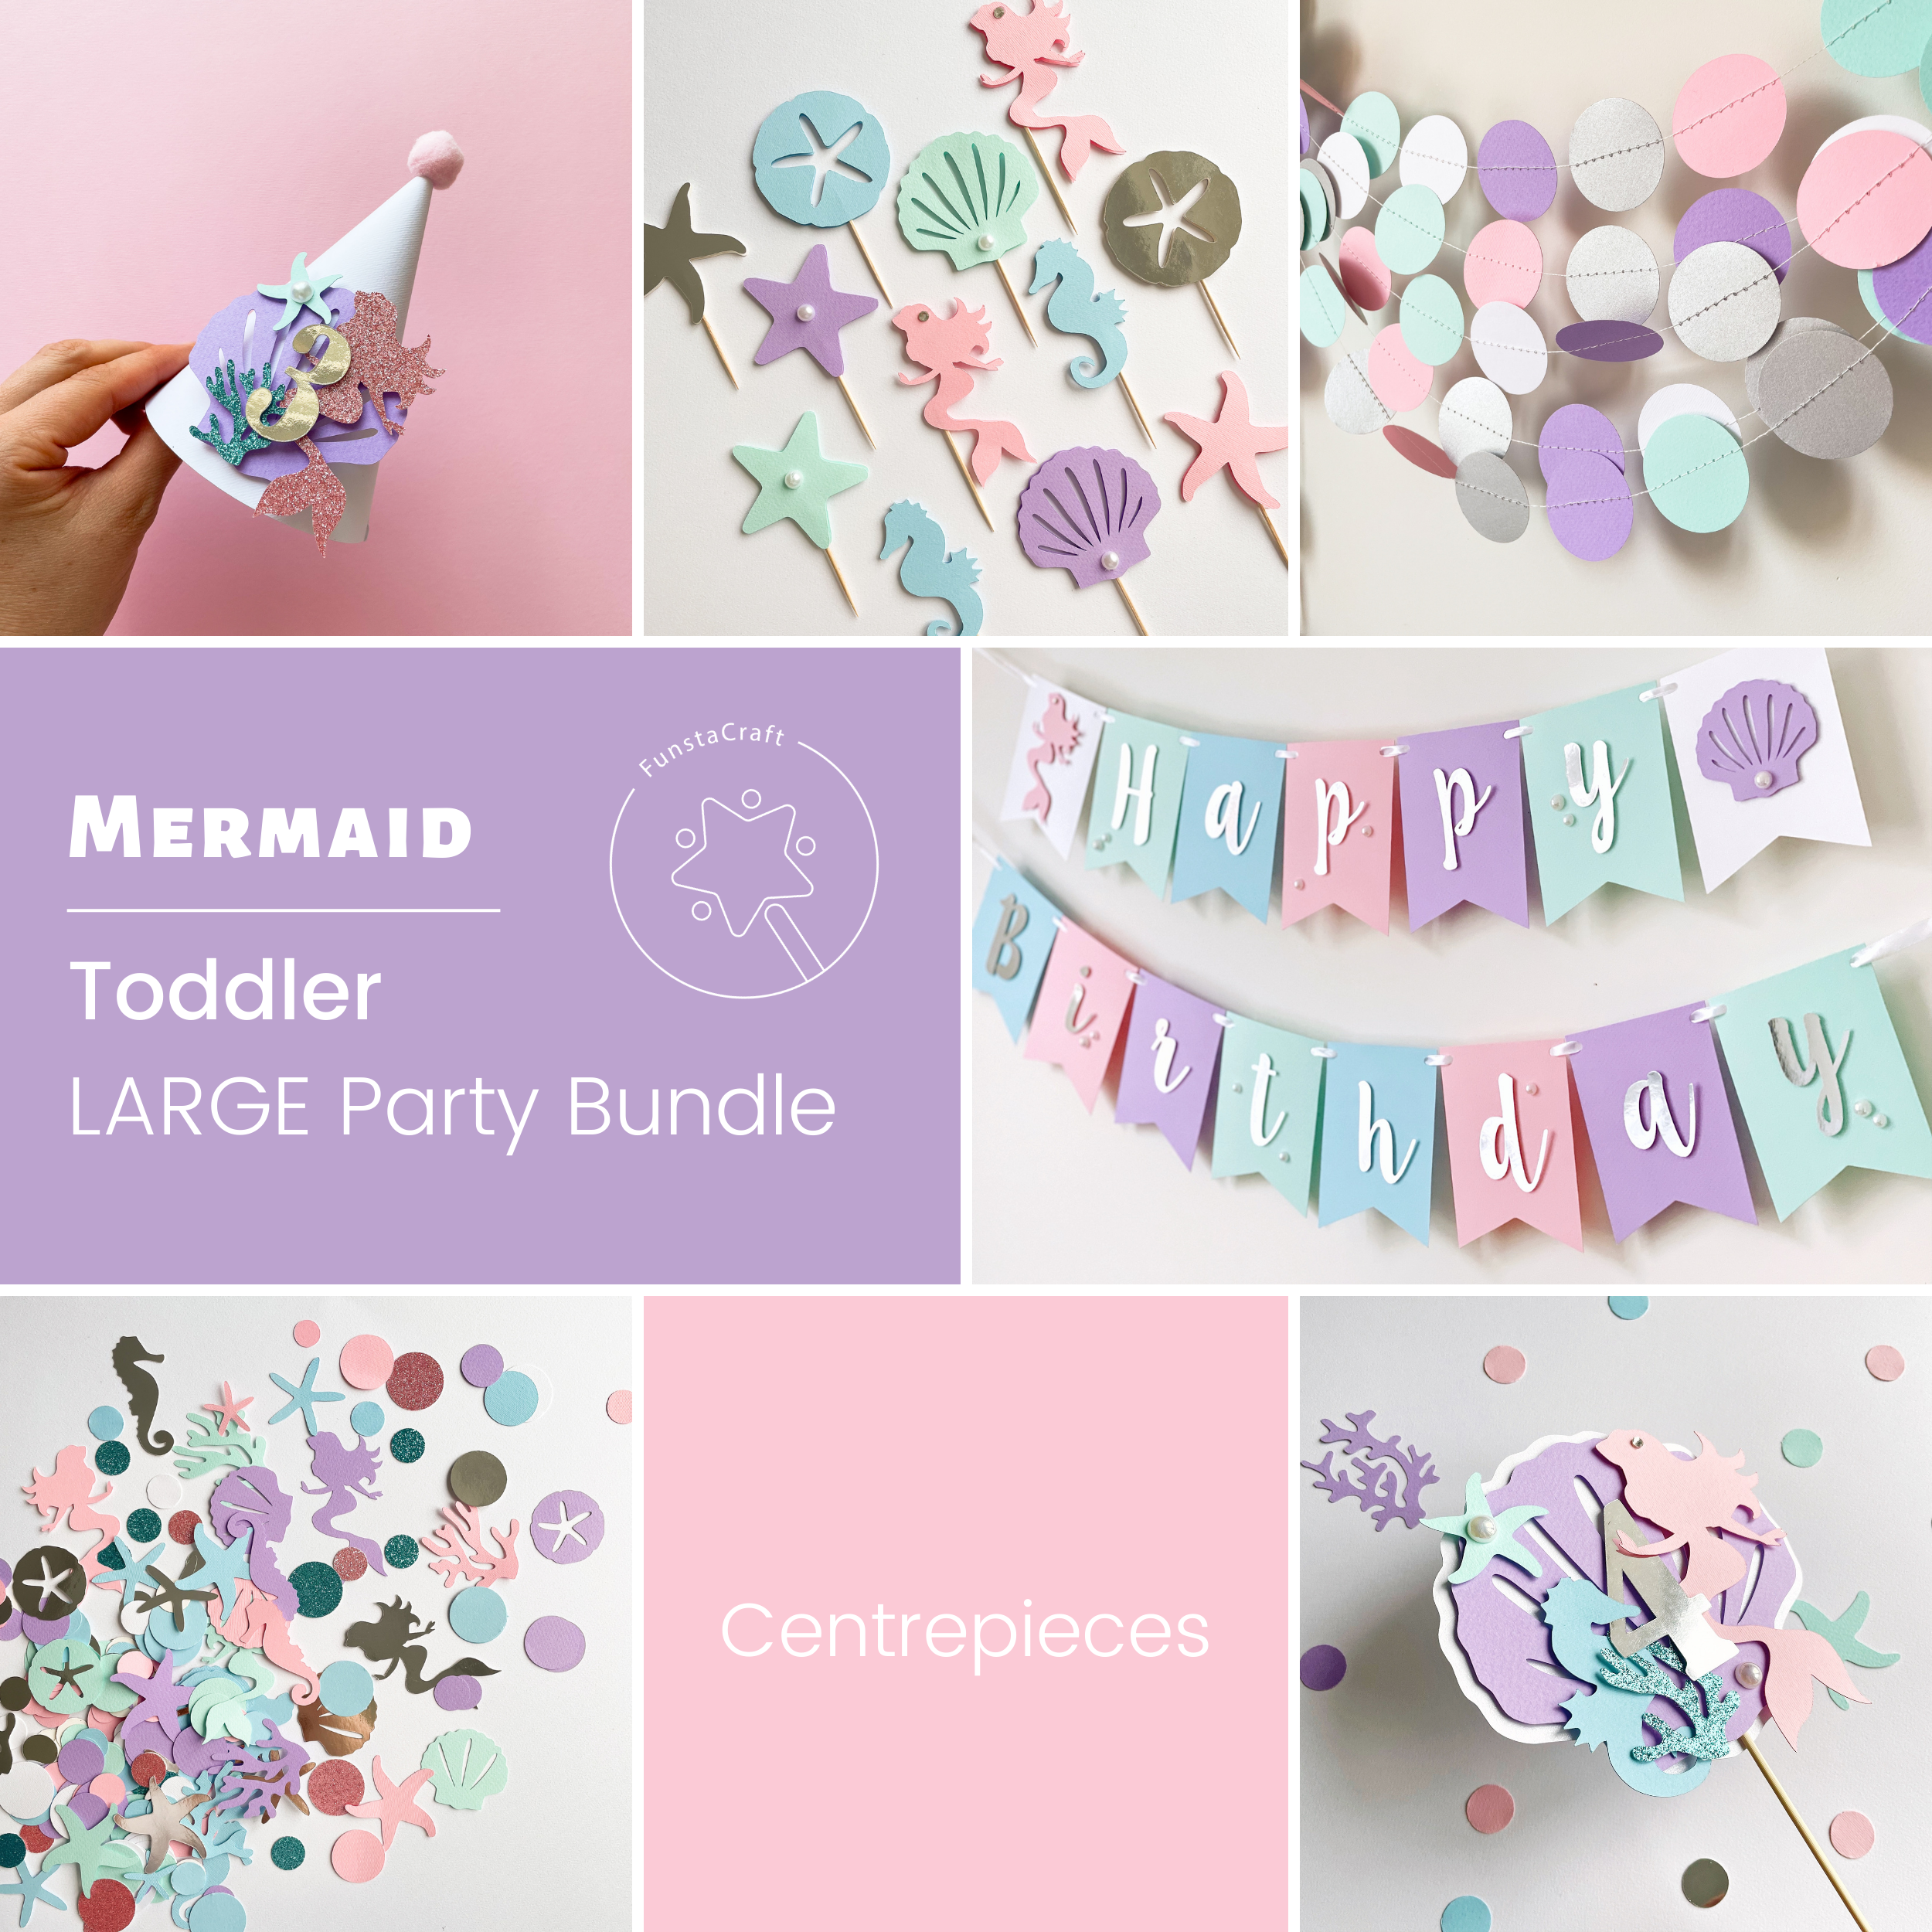 Mermaid Birthday Party Bundle Mermaid Toddler Party Decor Under the Sea Little Mermaid Sea Shells Horse Themed party